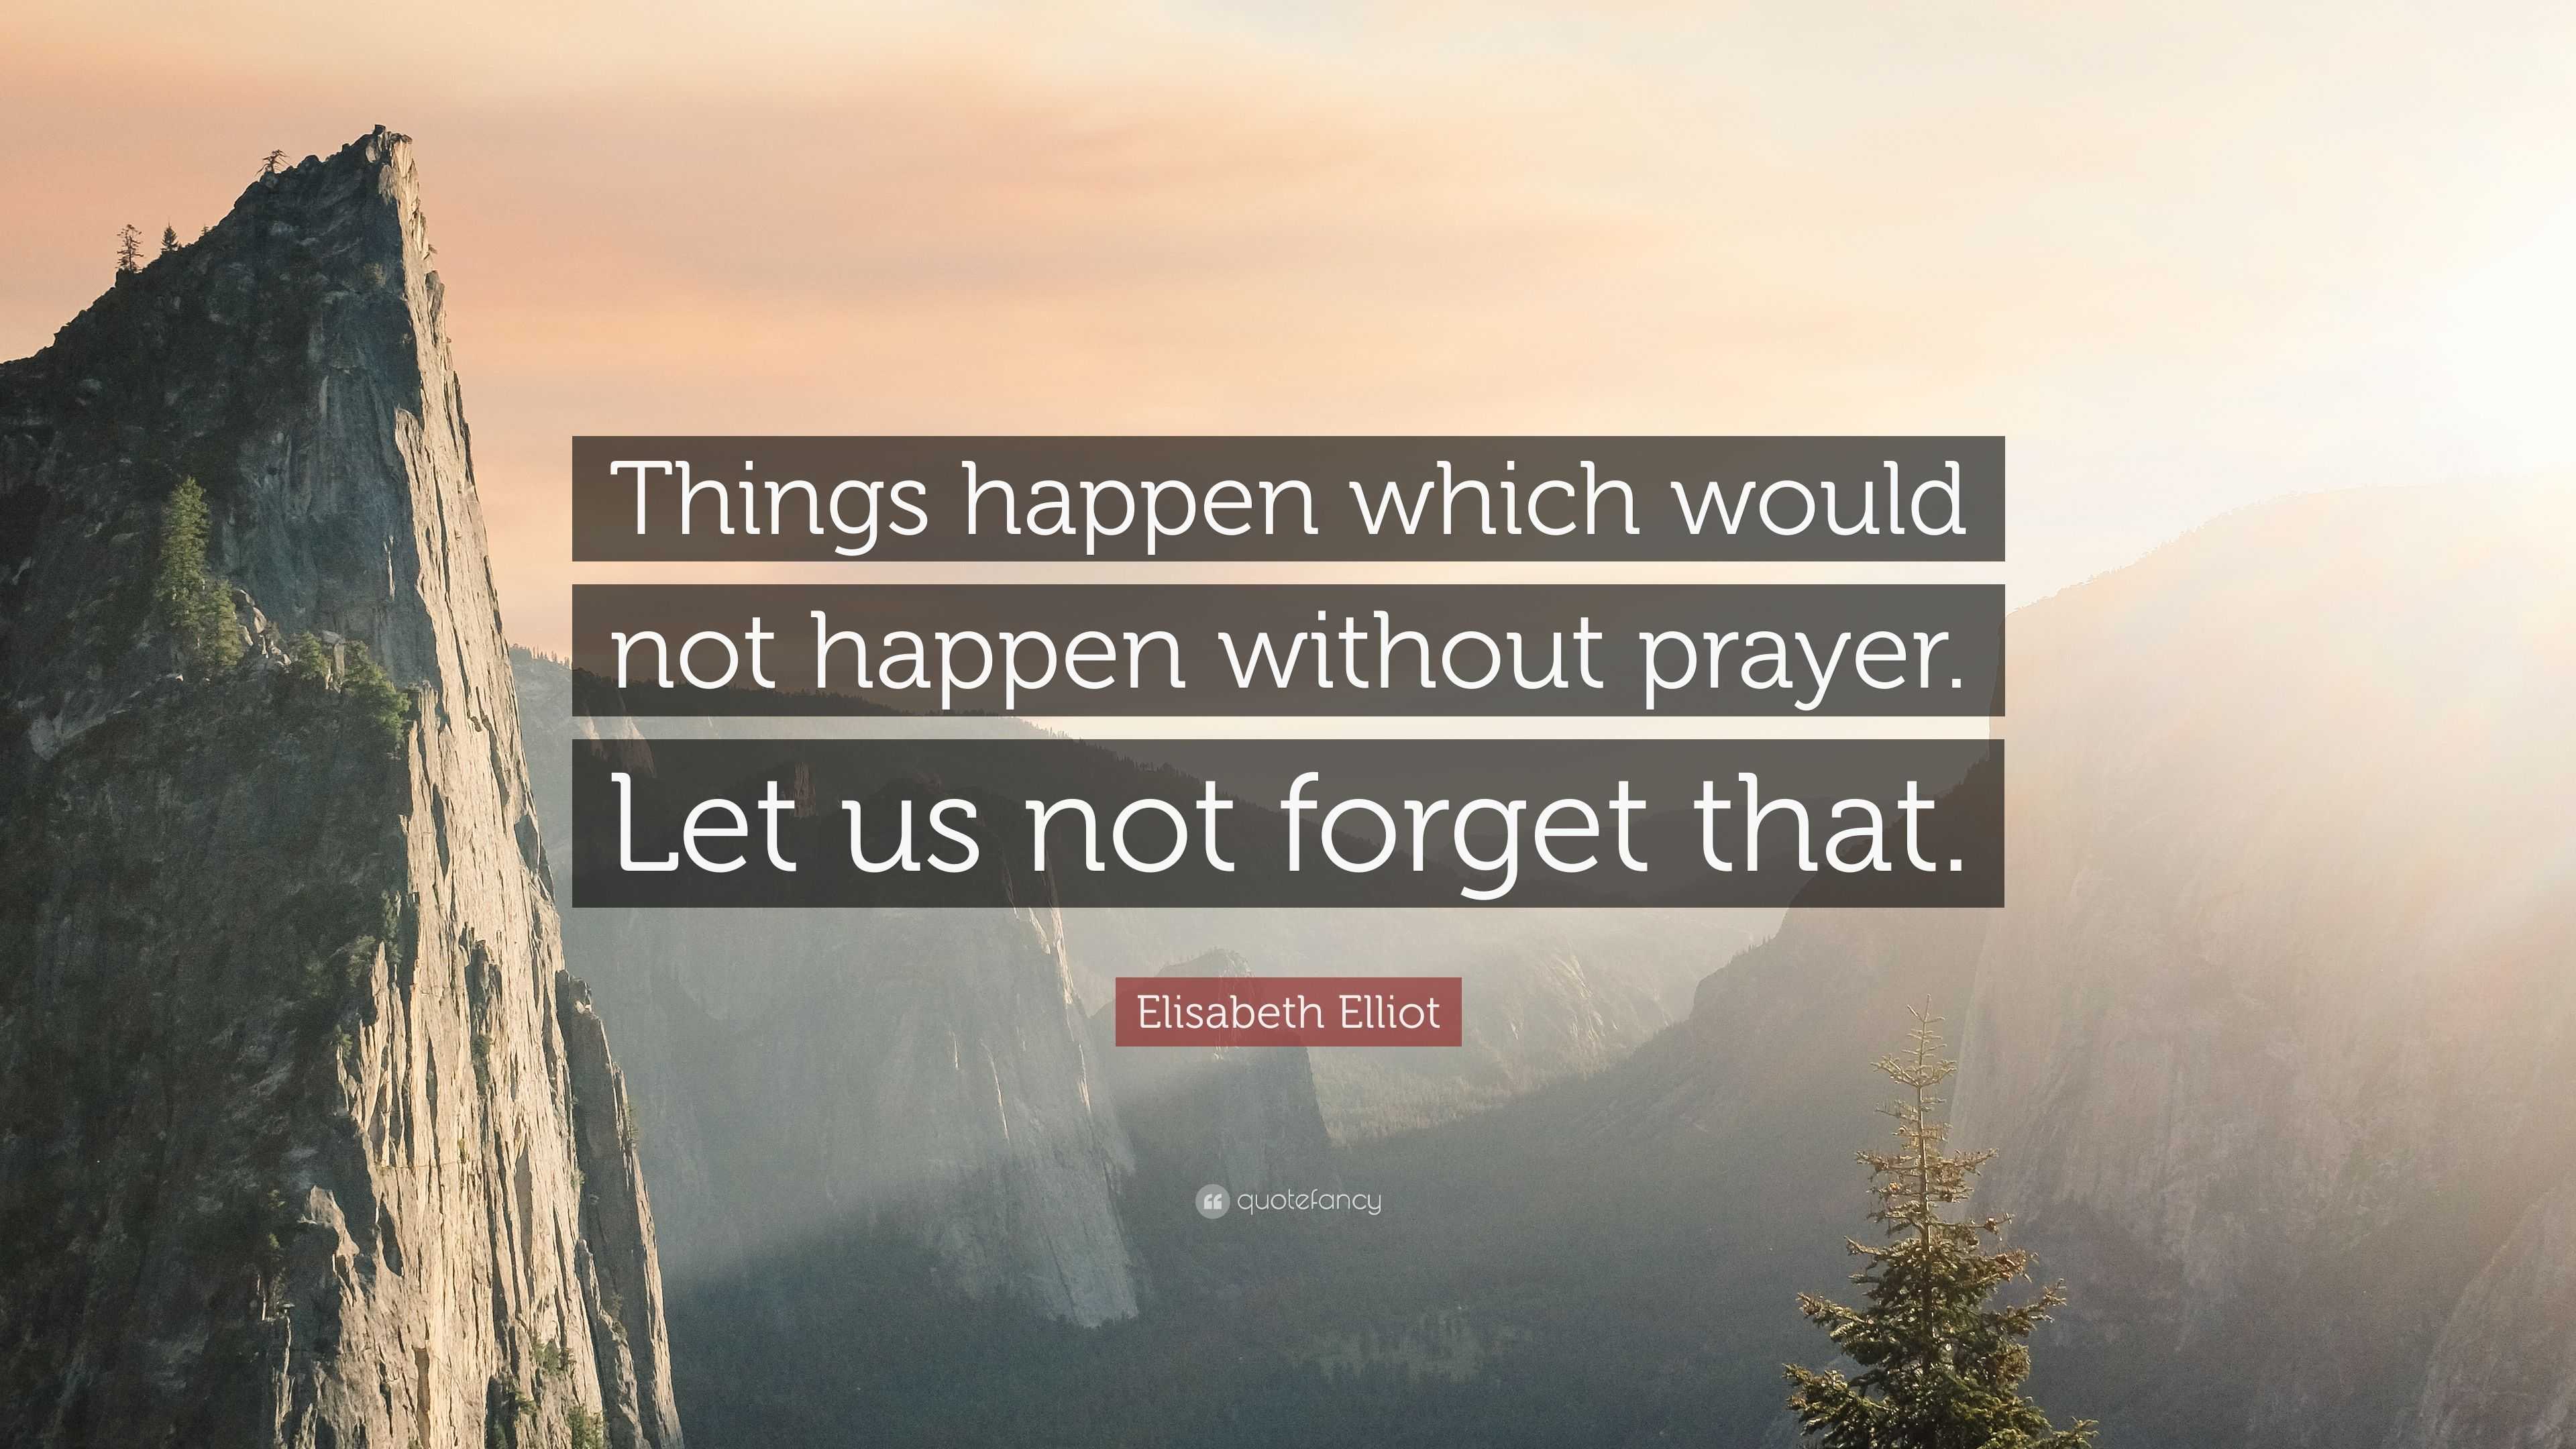 Elisabeth Elliot Quote: “Things happen which would not happen without ...